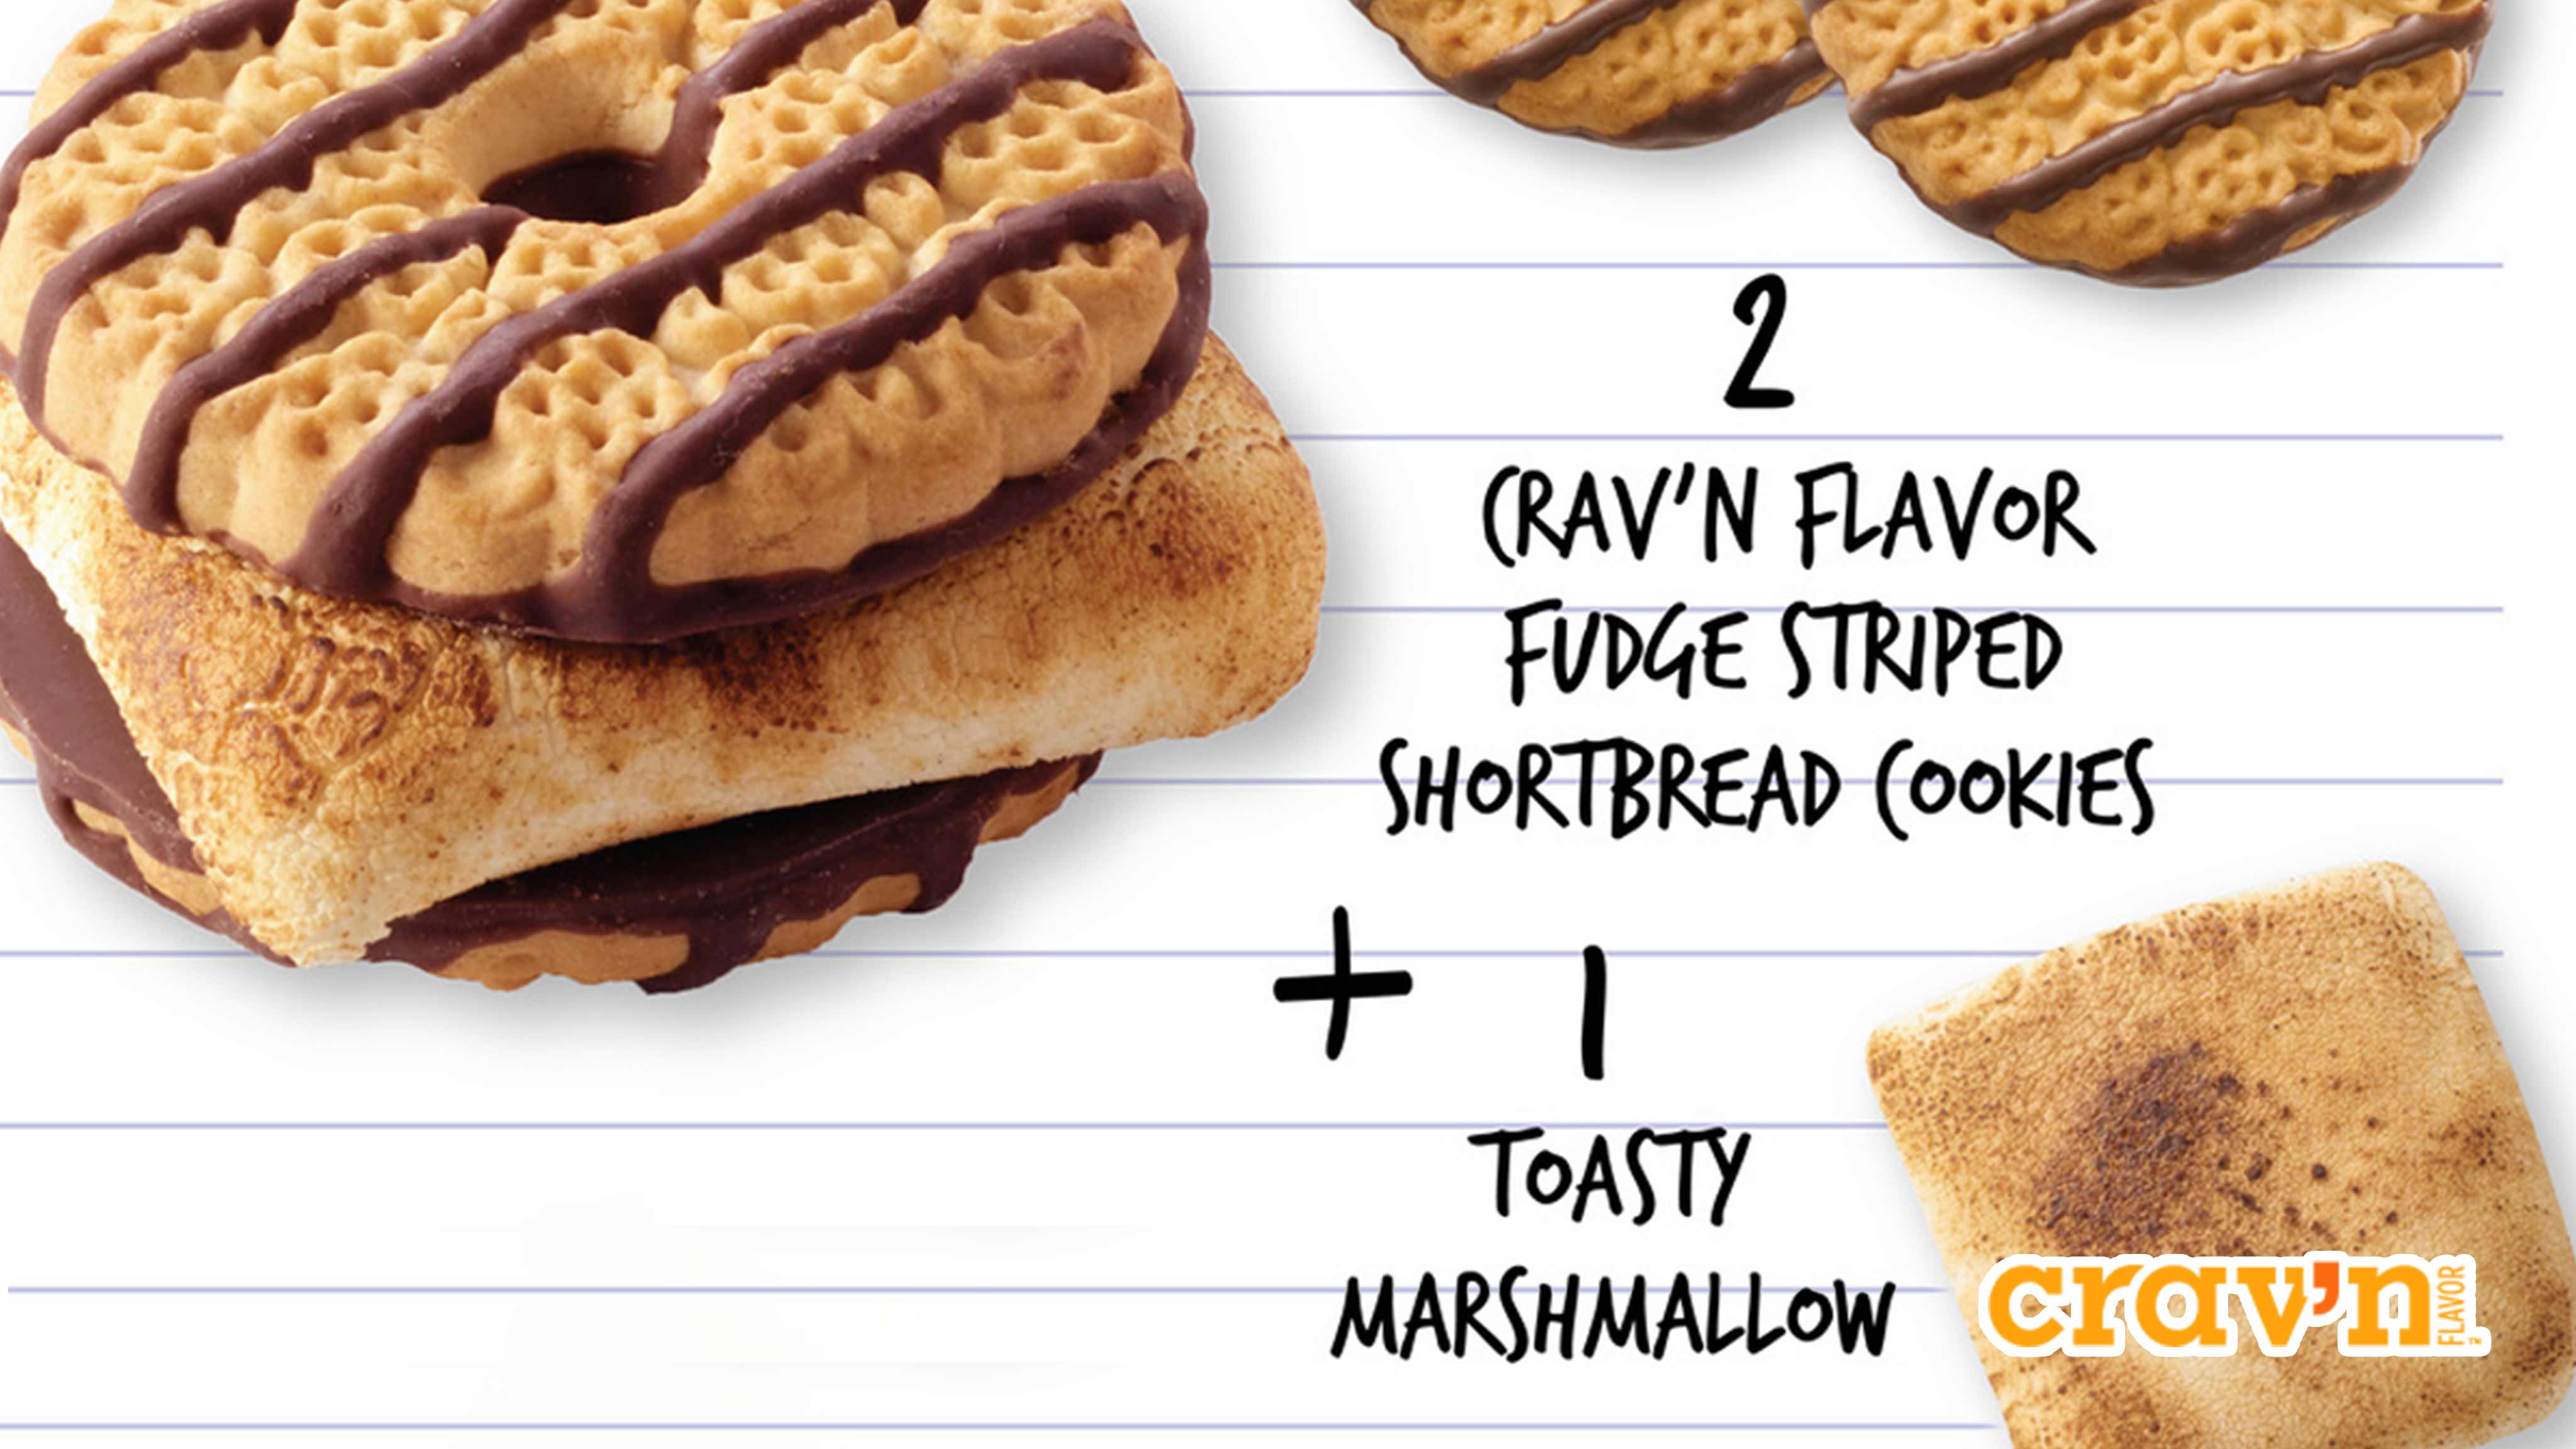 Image for Recipe Toasty Fudge Striped S'mores